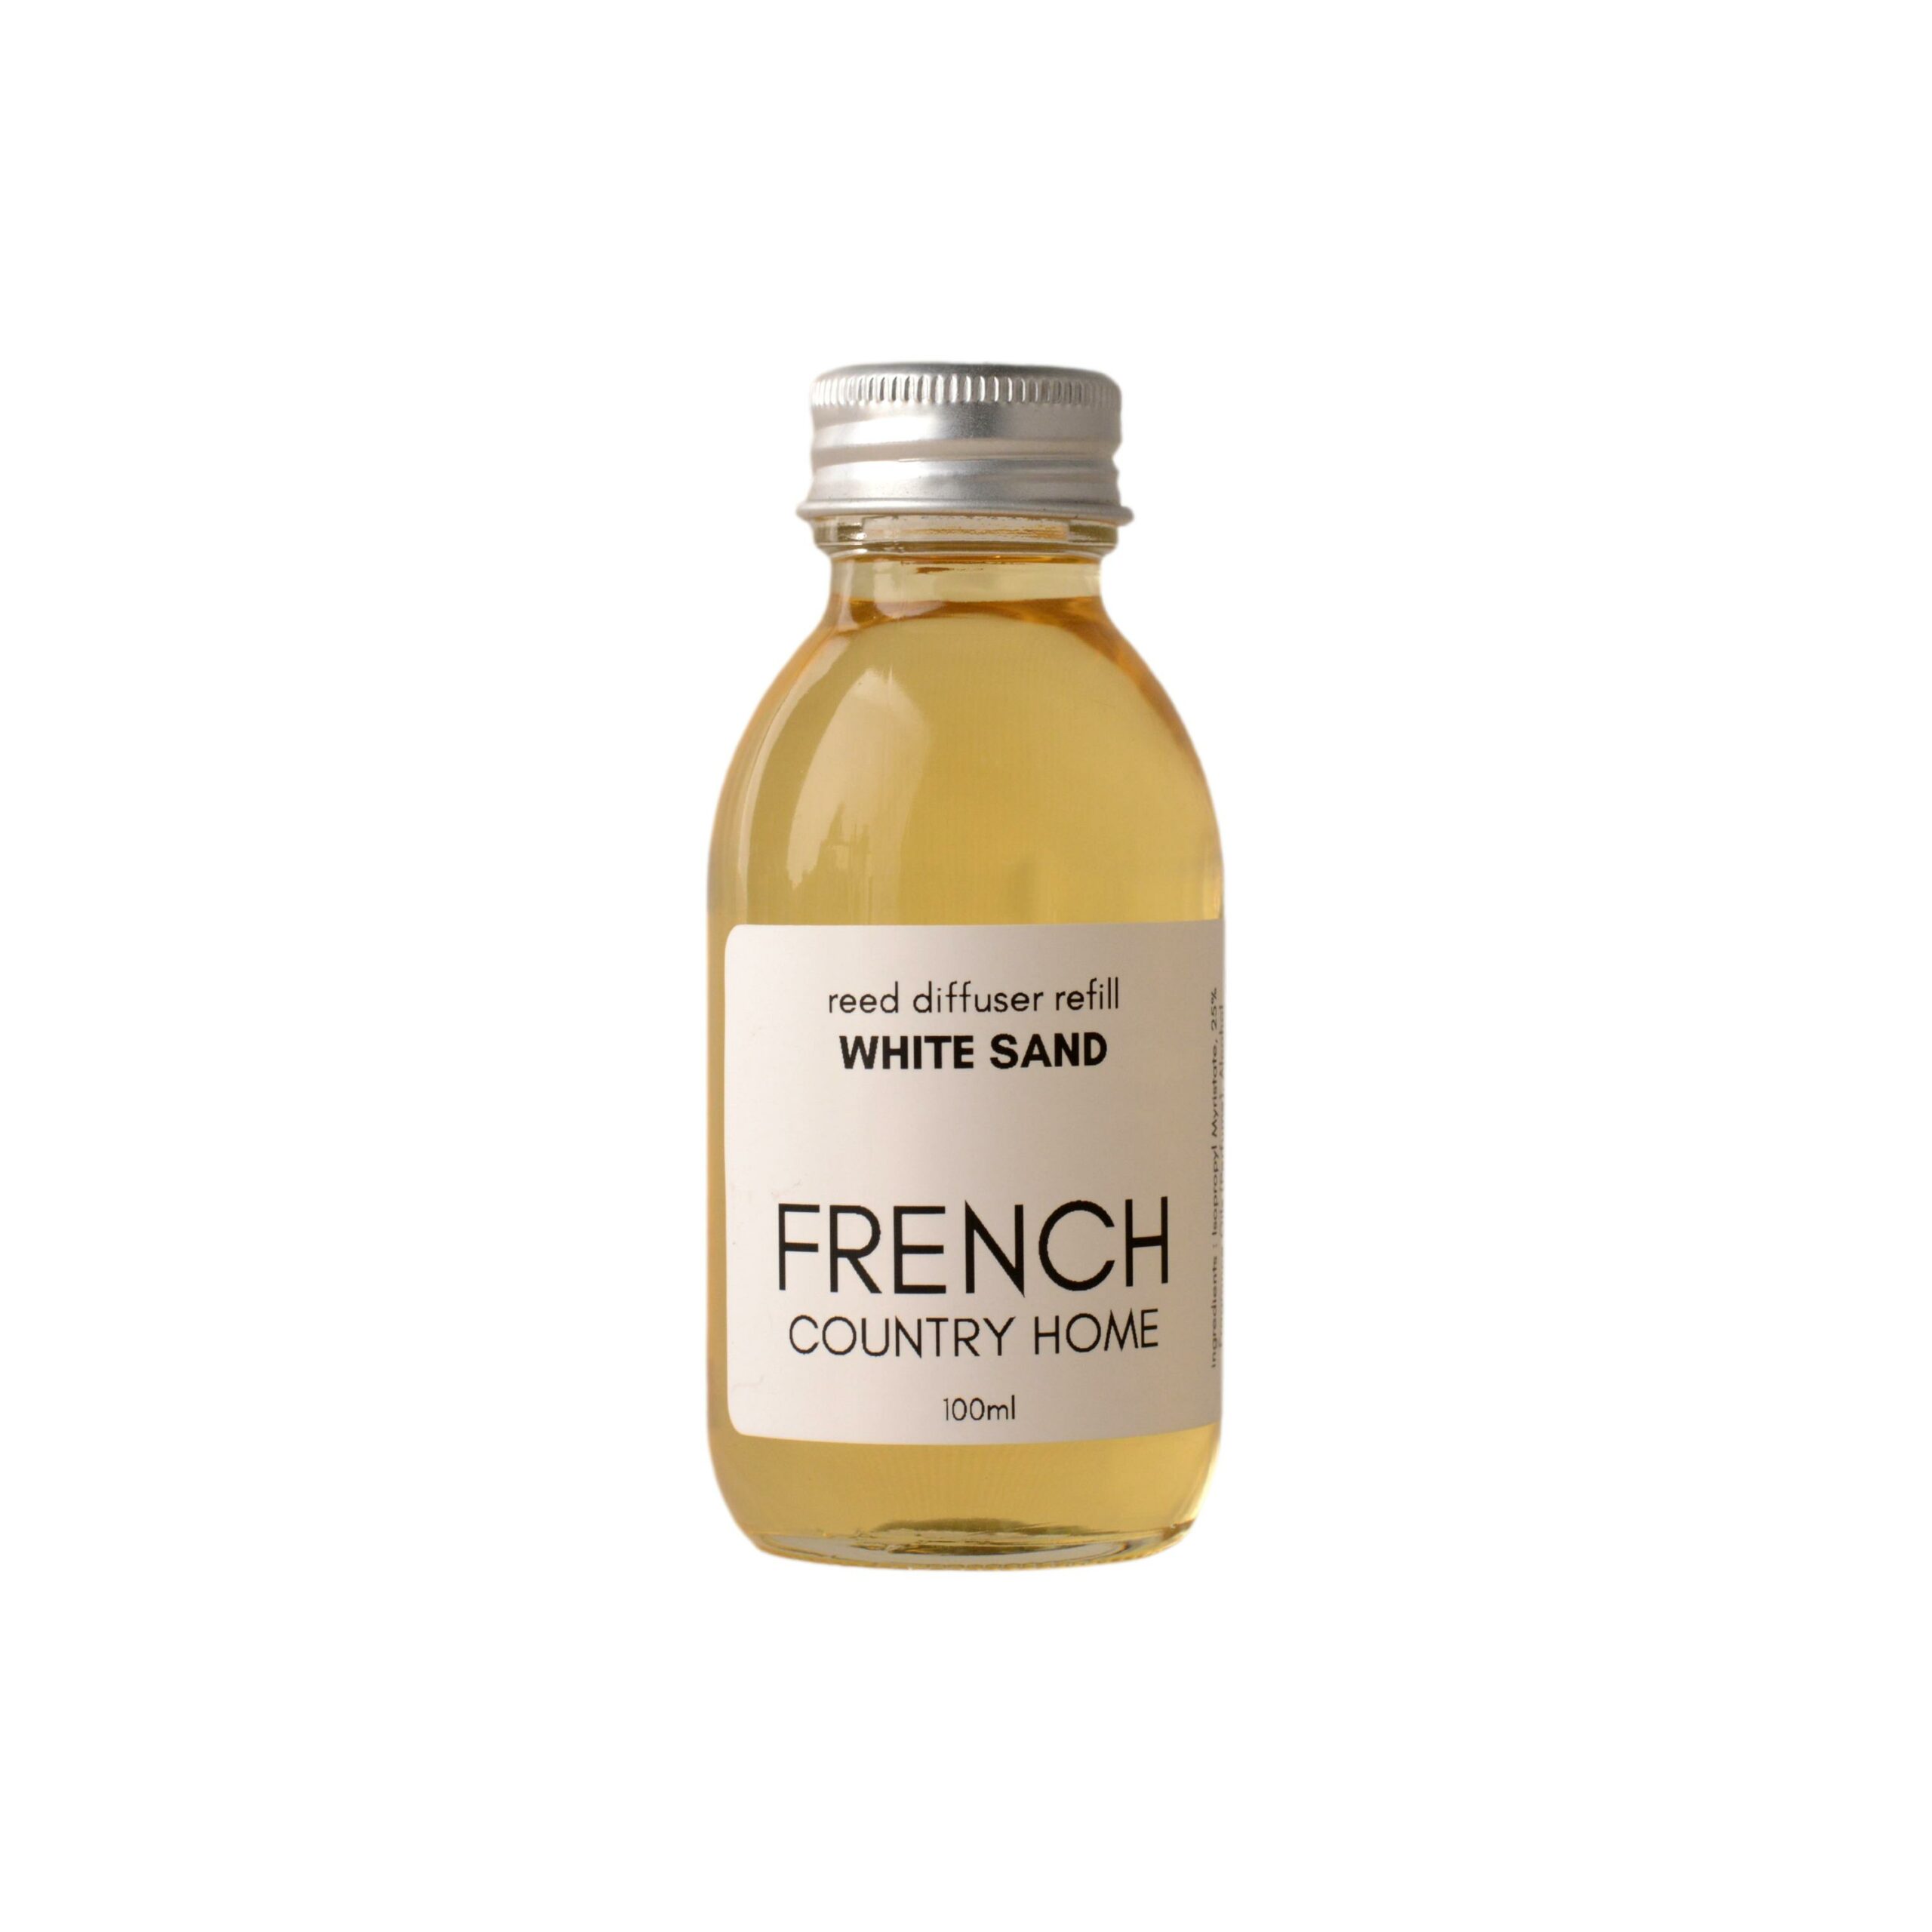 French-Country-Home-reed-diffuser-refill-100ml